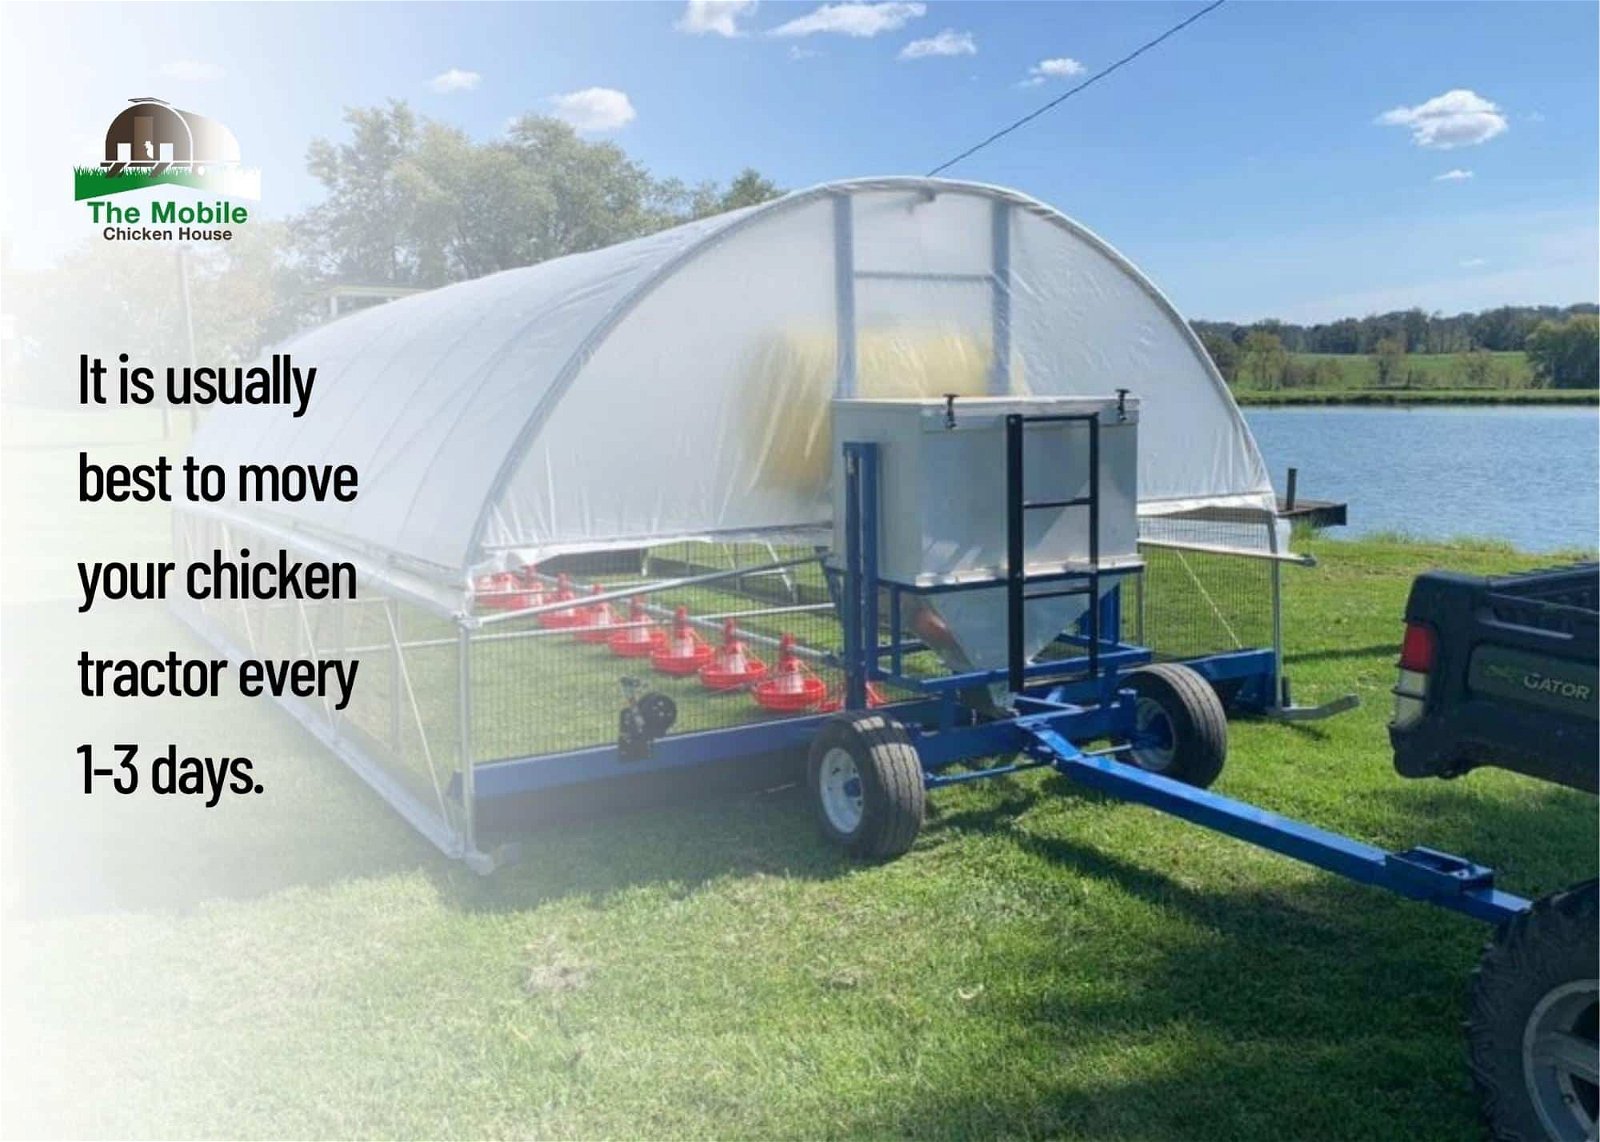 Move your chicken tractor every several days